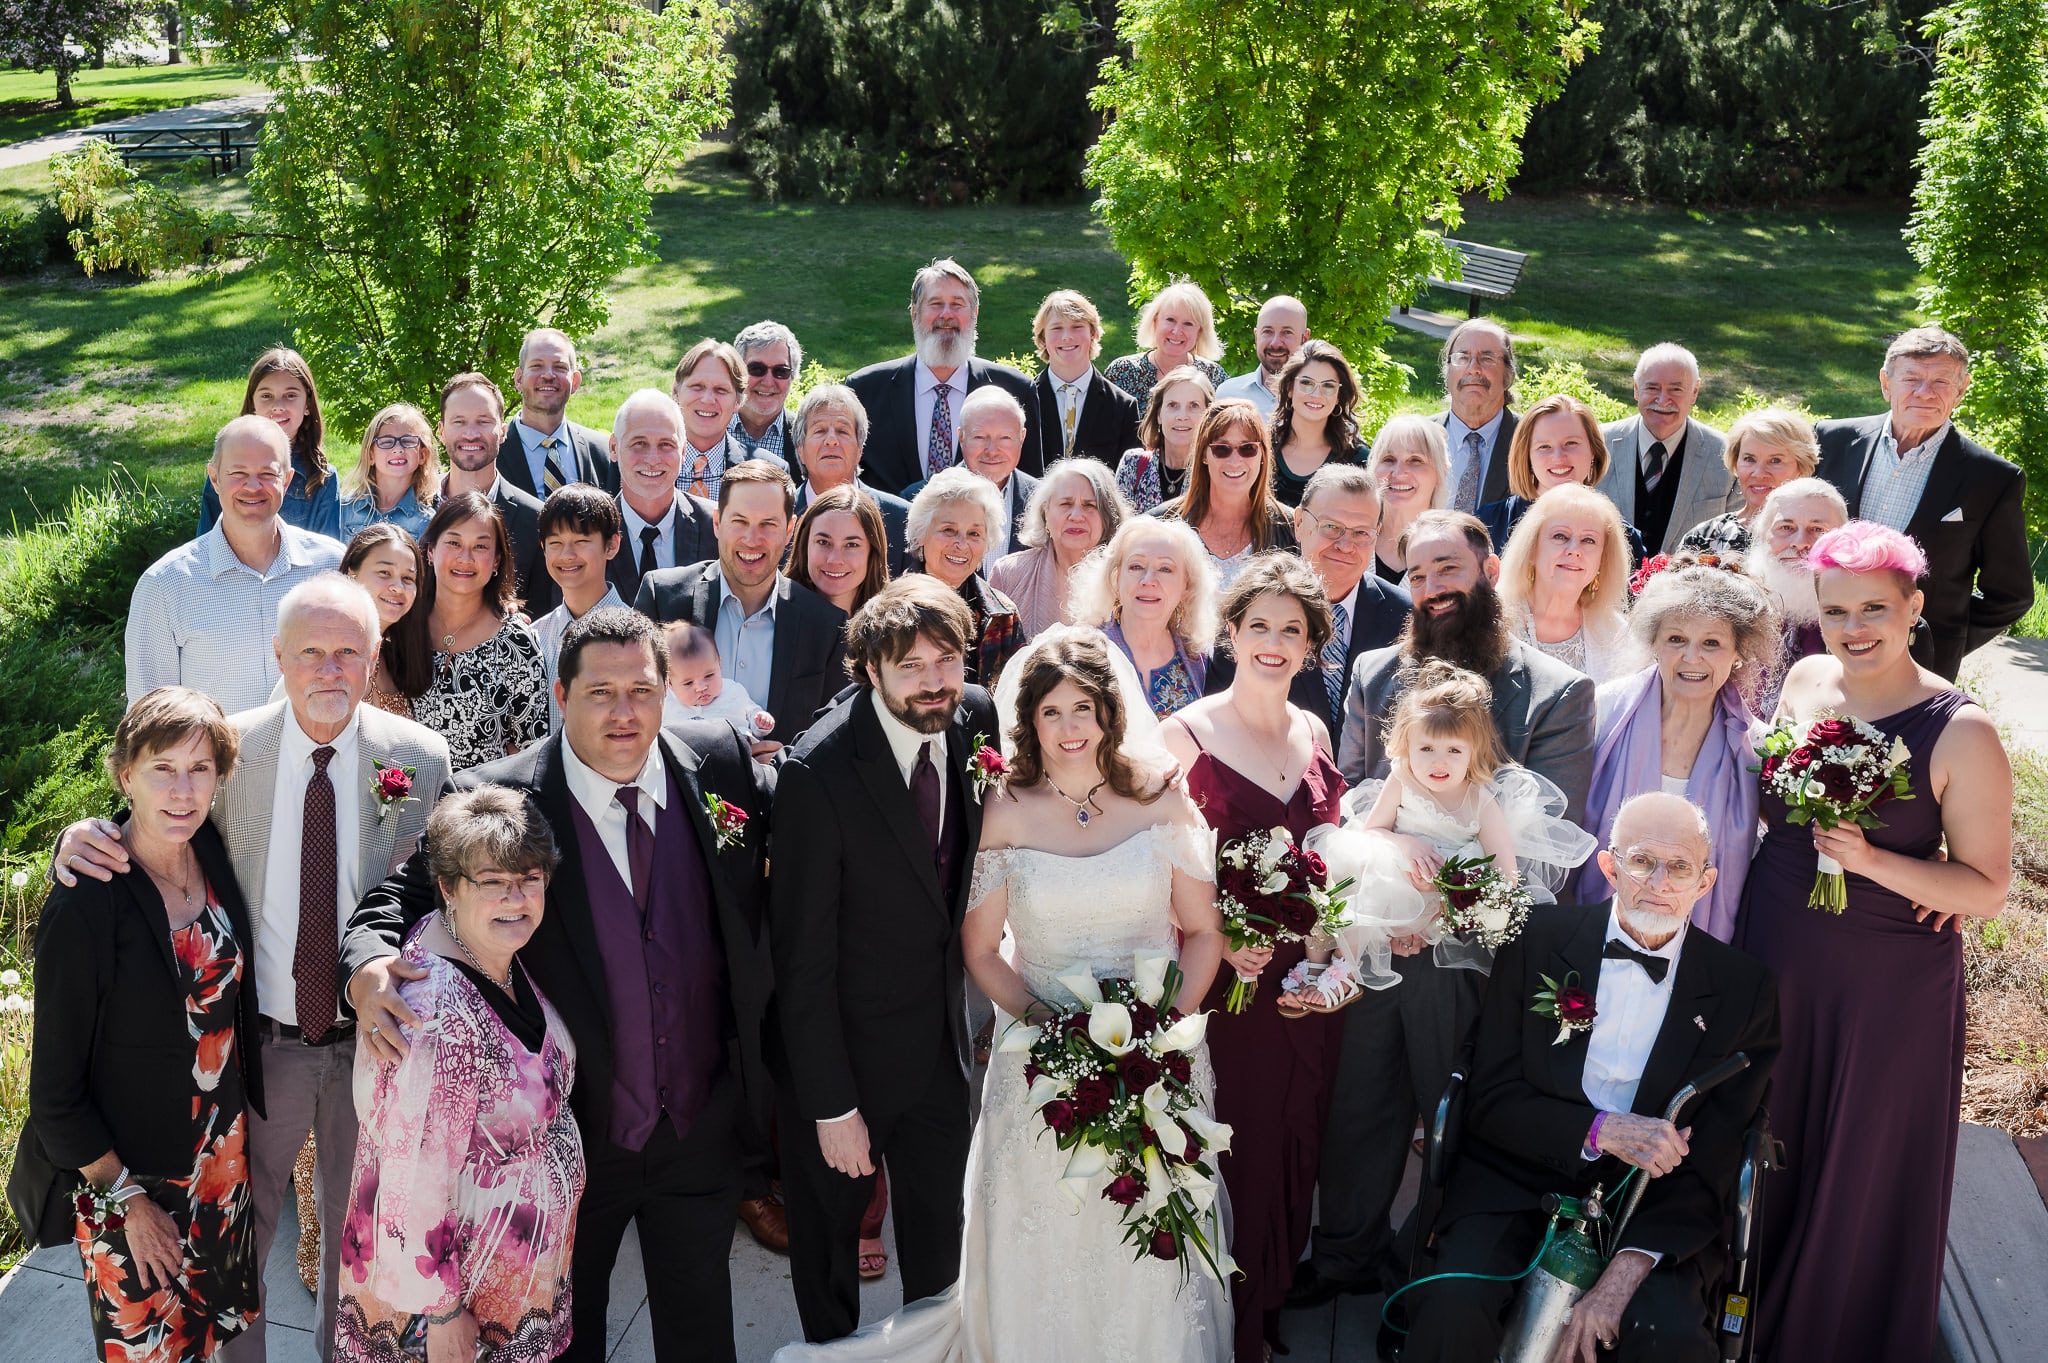 A large wedding party after the ceremony illustrates that how to get the best large group photos often involves the photographer shooting from a step ladder.